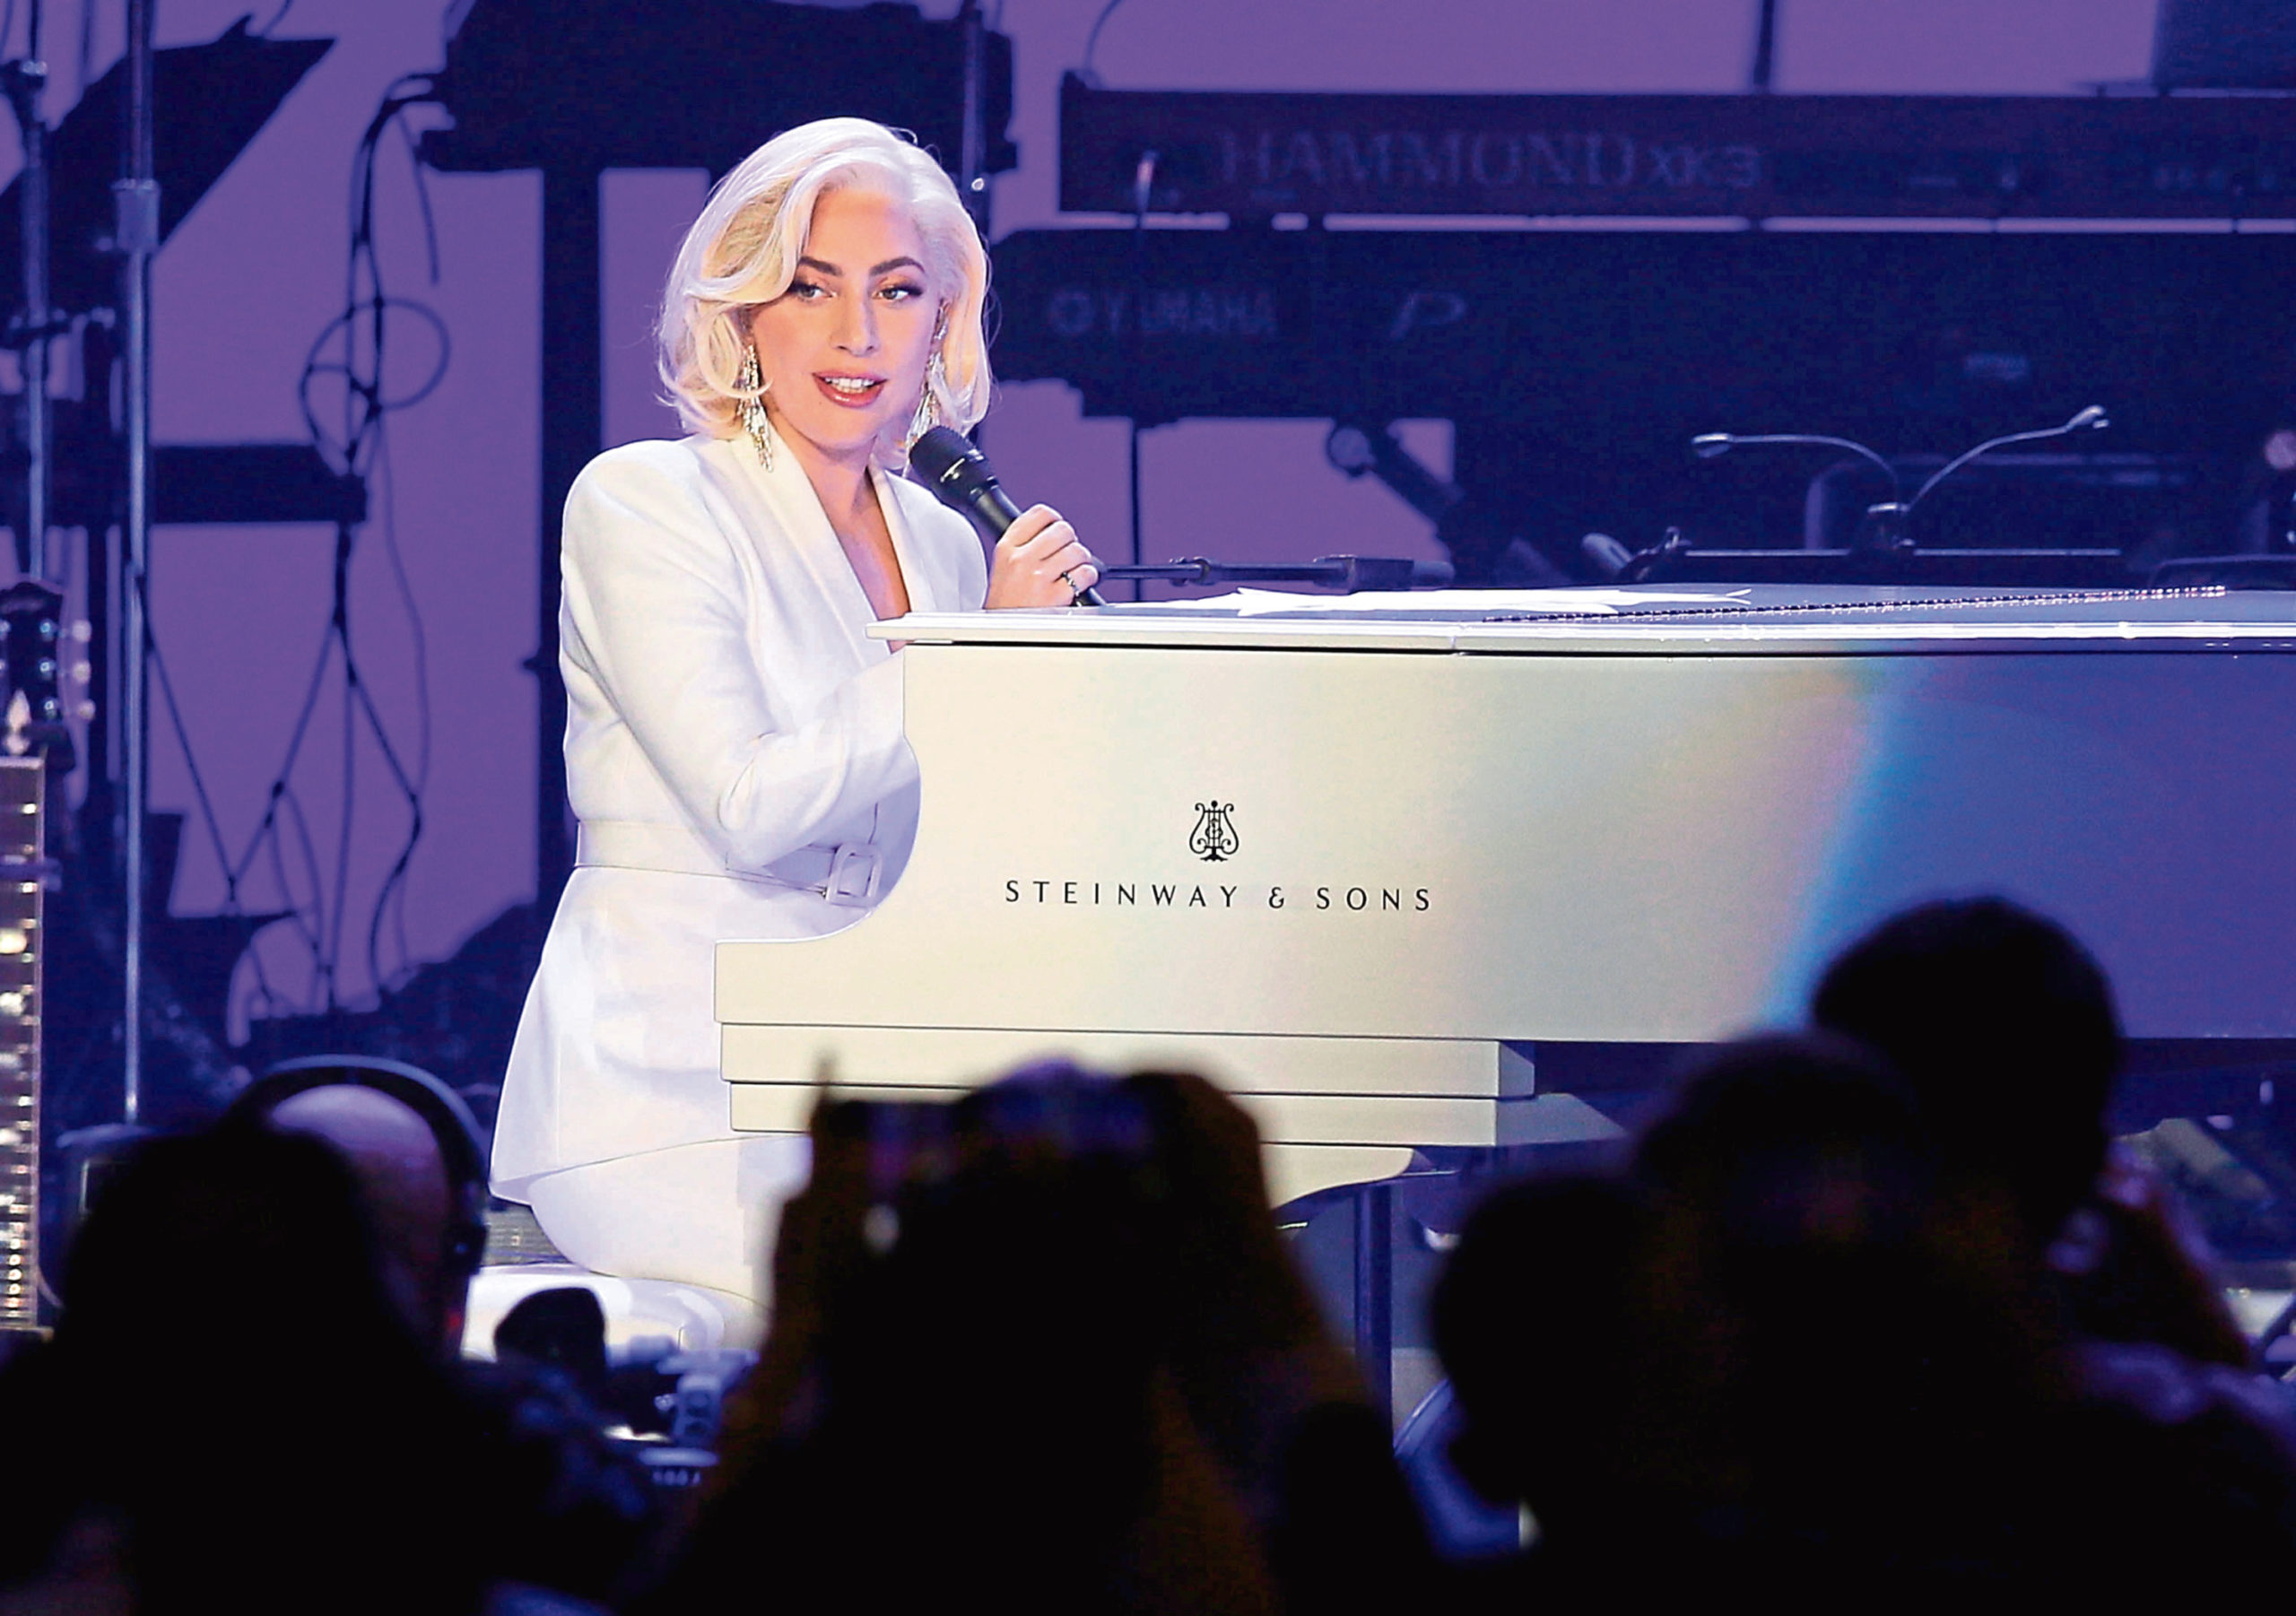 The one and only Lady Gaga has curated a stellar line-up